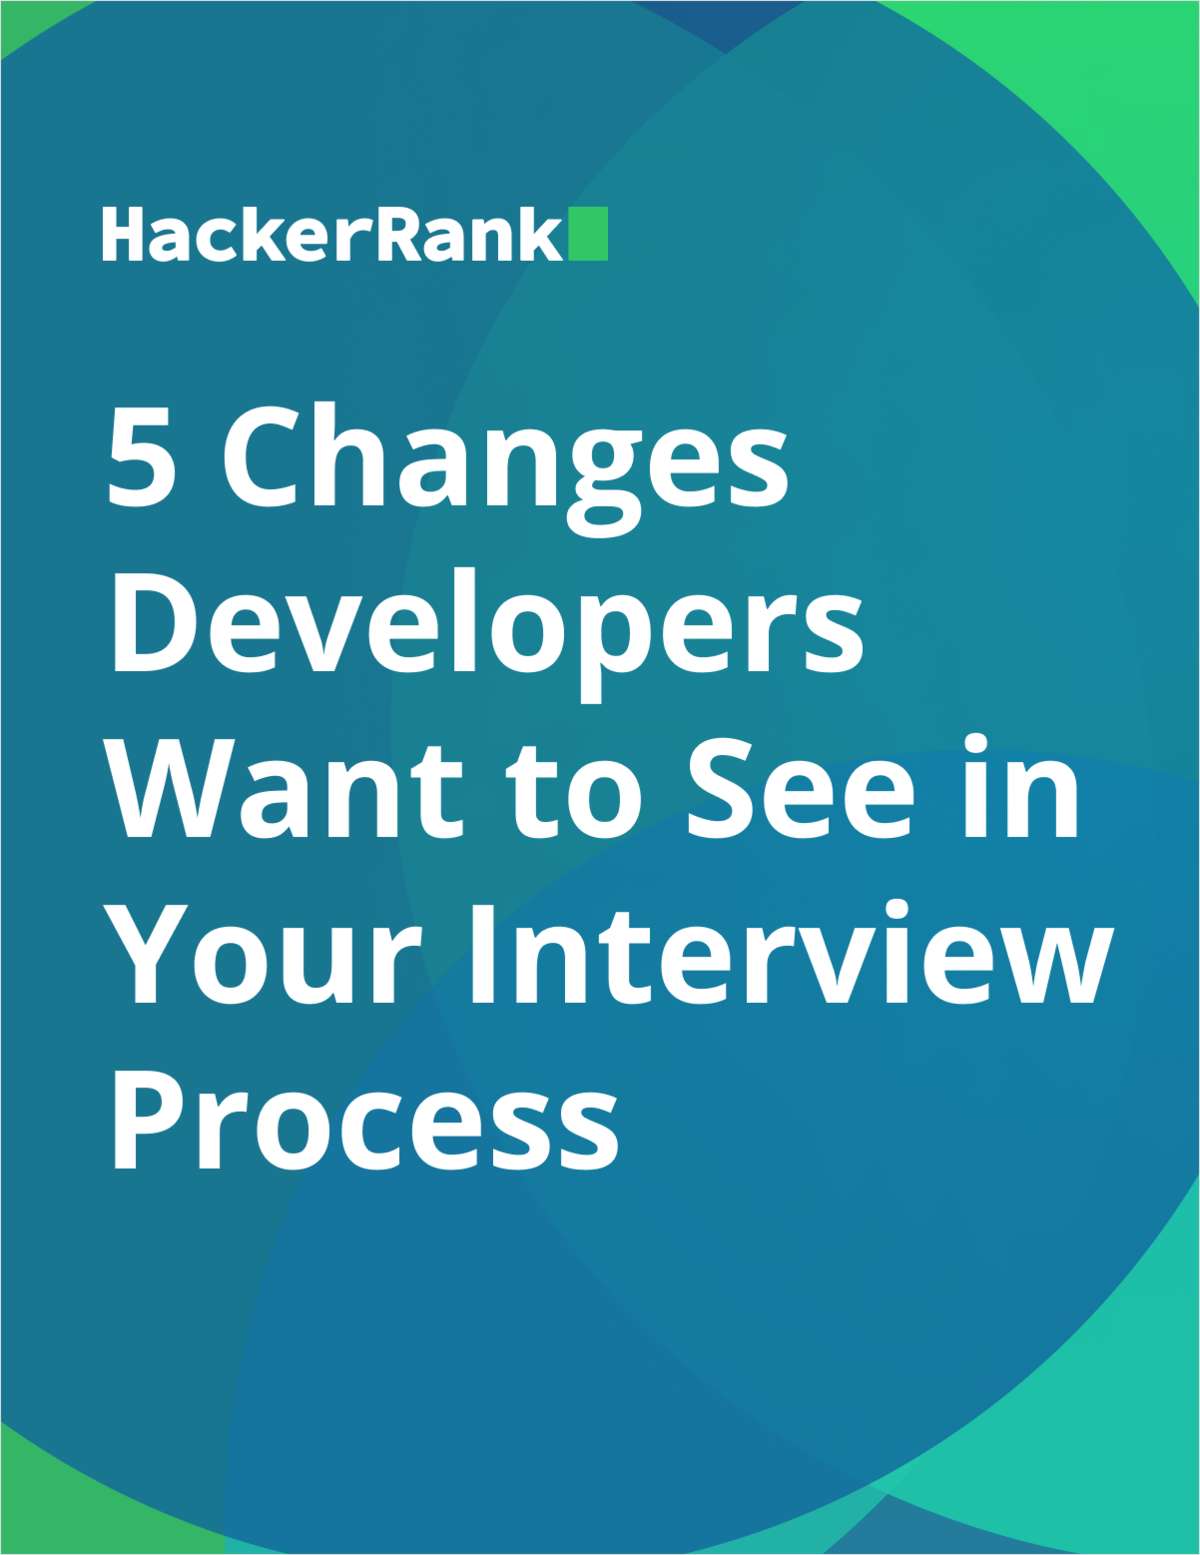 5 Changes Developers Want to See in Your Interview Process